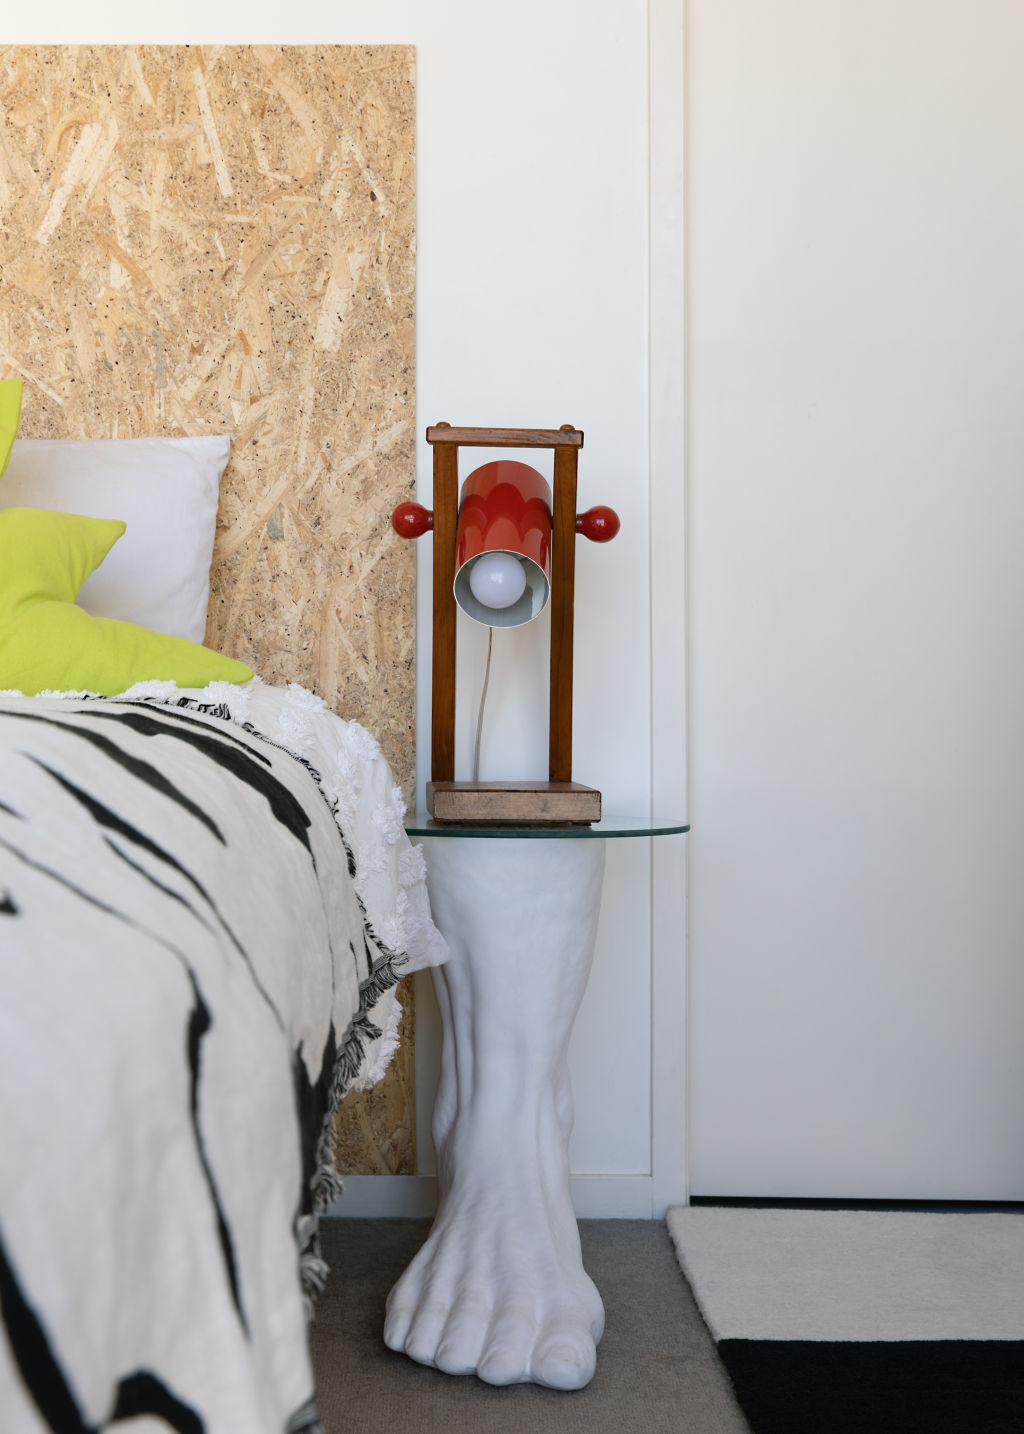 Wacky items throughout the home are reminiscent of a Nickelodeon set. Photo: Emma Byrnes